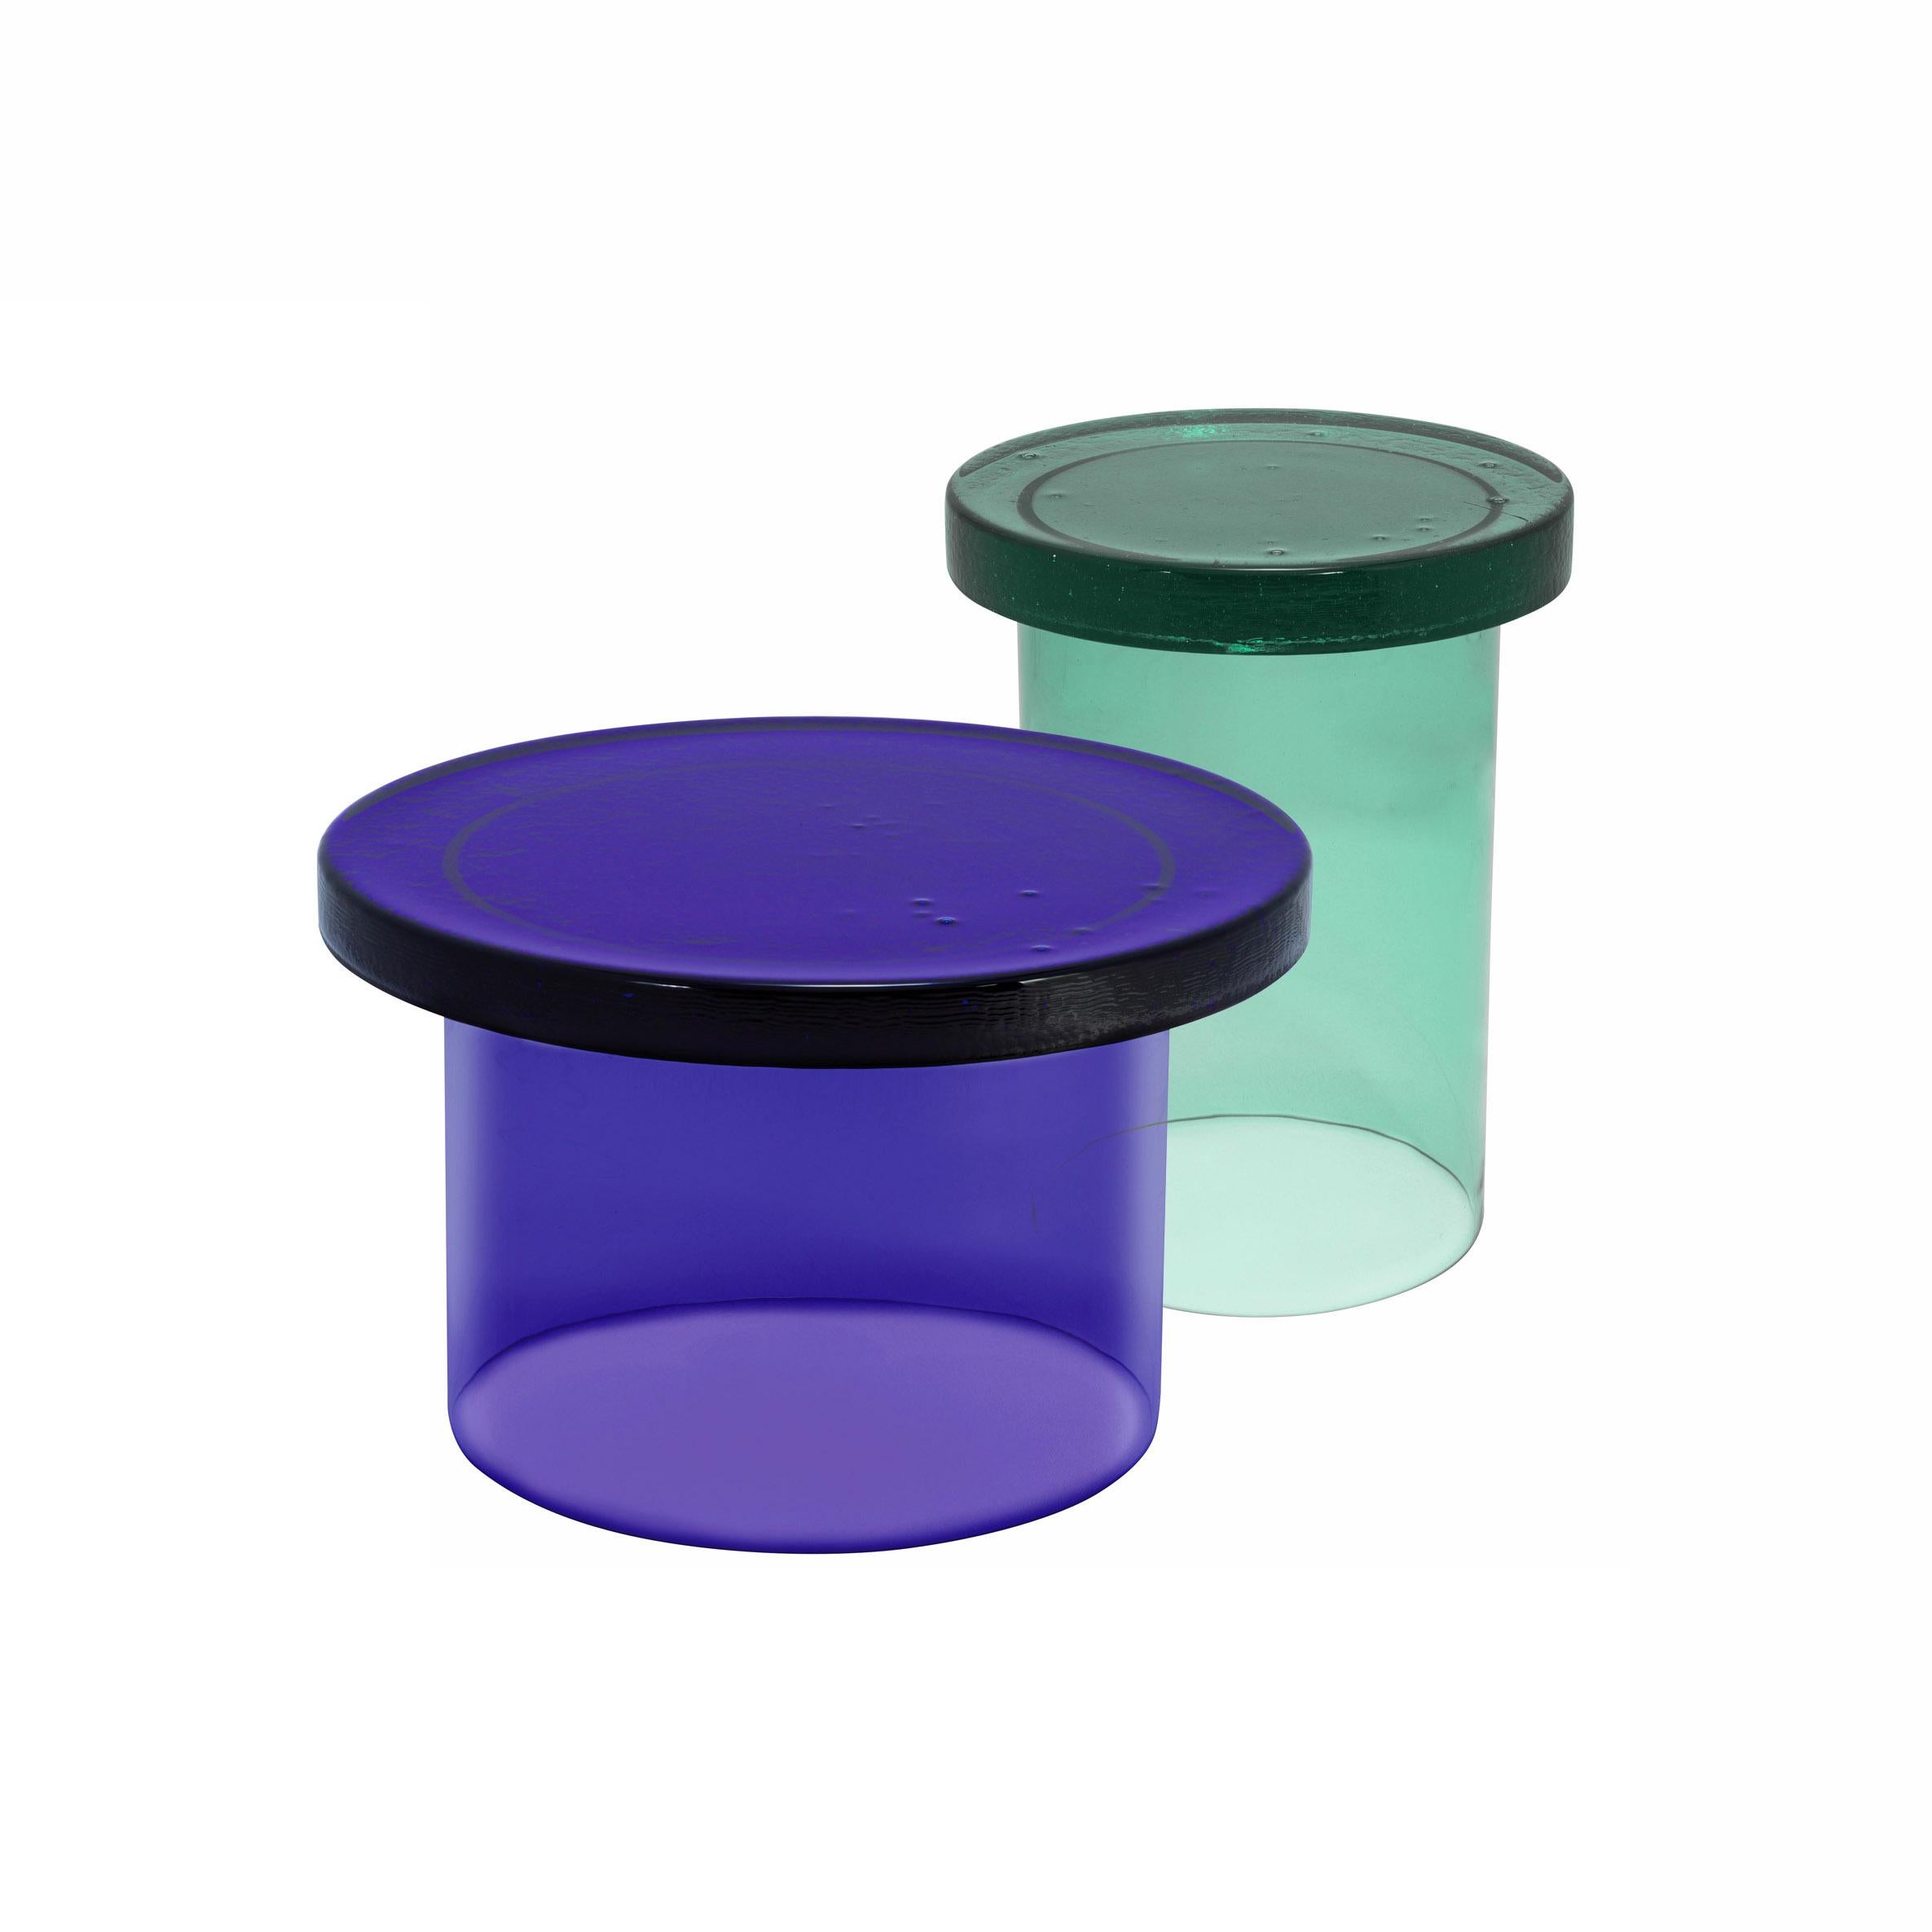 Set of 2 Alwa three tables by Pulpo.
Dimensions: D56 x H35 cm // D38 x H44 cm.
Materials: casted and handblown glass.

Also available in different colors. 

Normally, glass is regarded as being lightweight with sharp edges. In contrast,